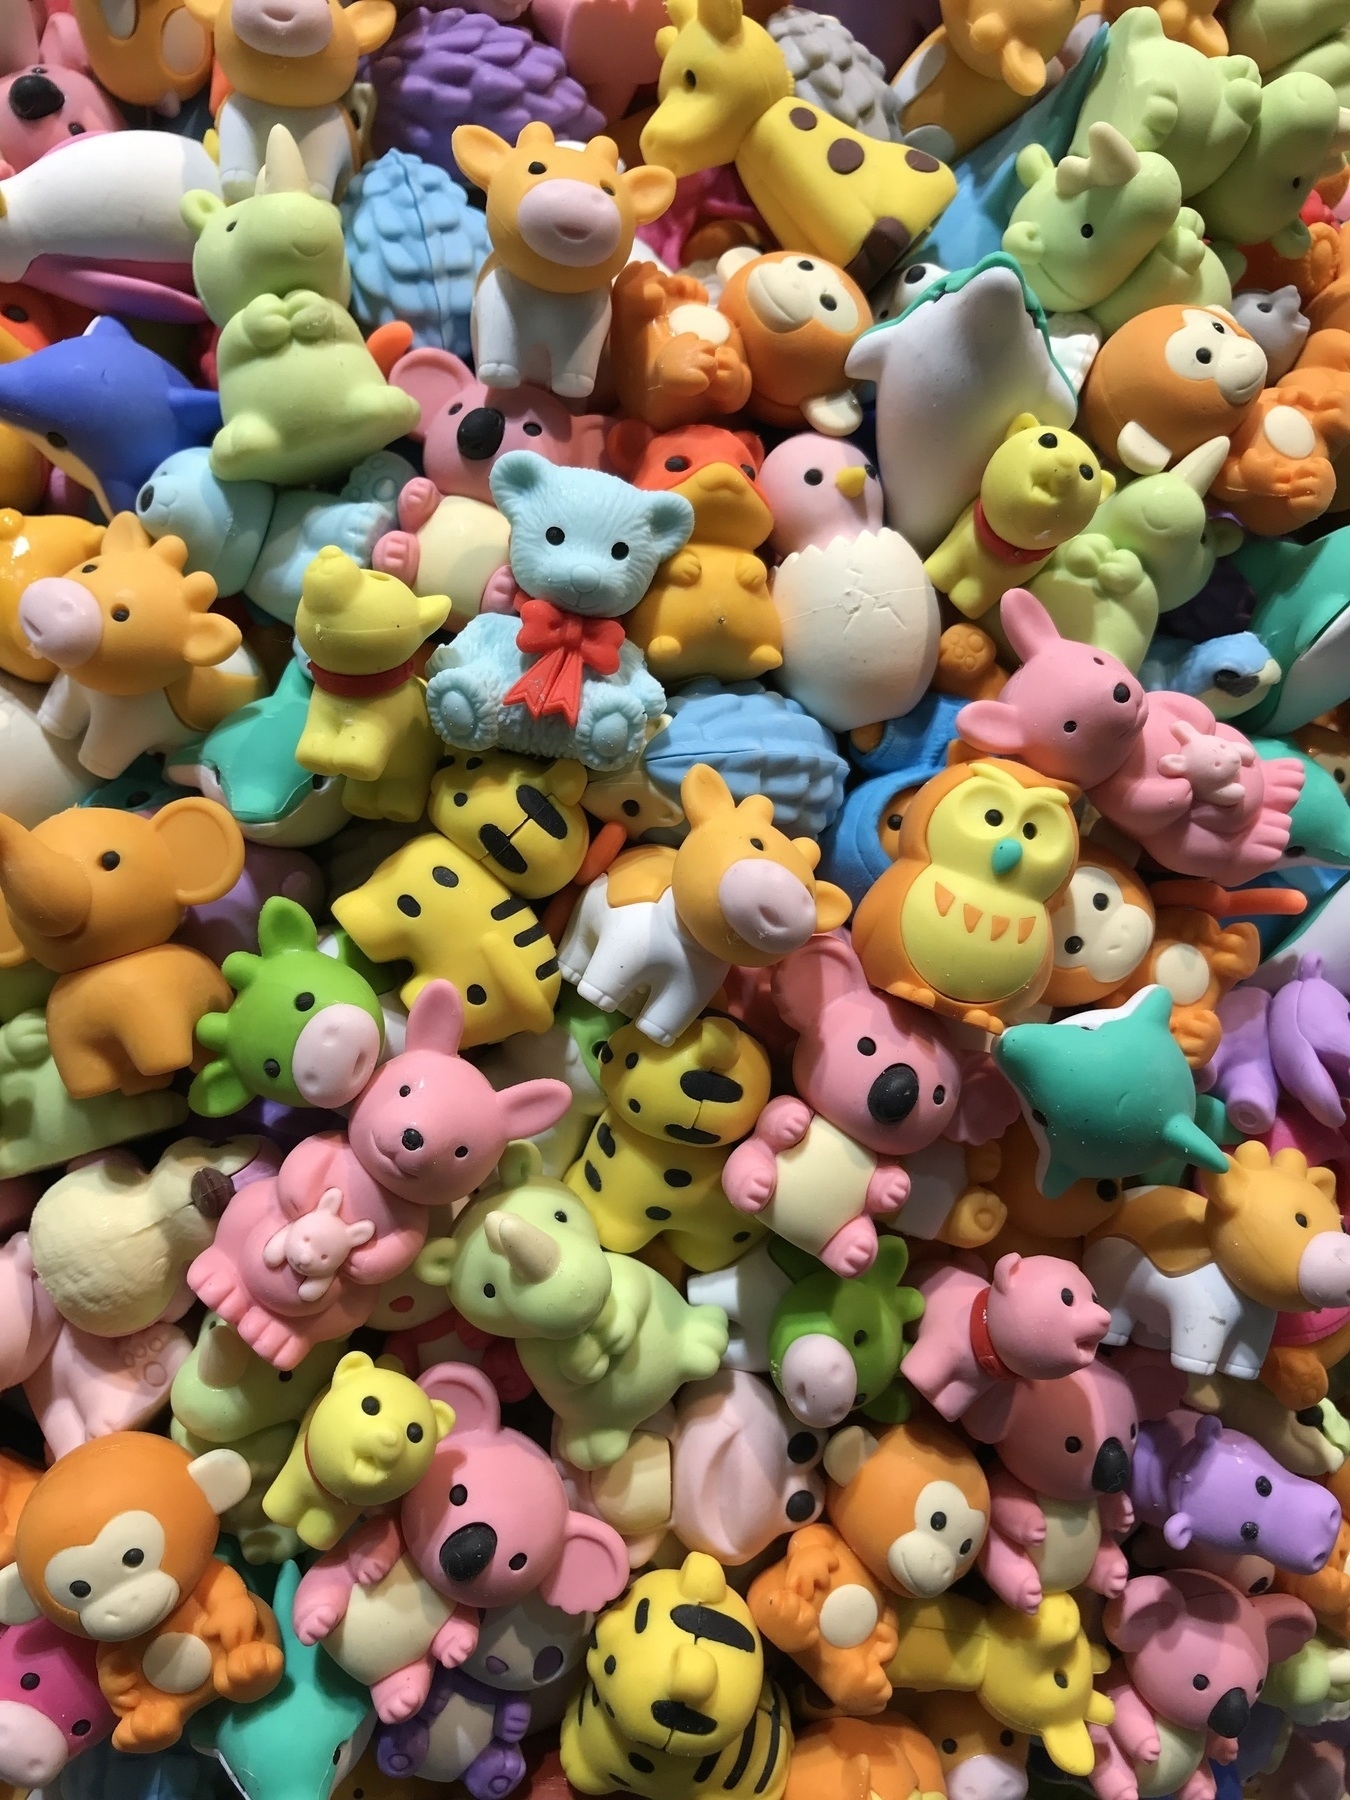 Lots and lots of little plastic animals, close up, as part of an art exhibit